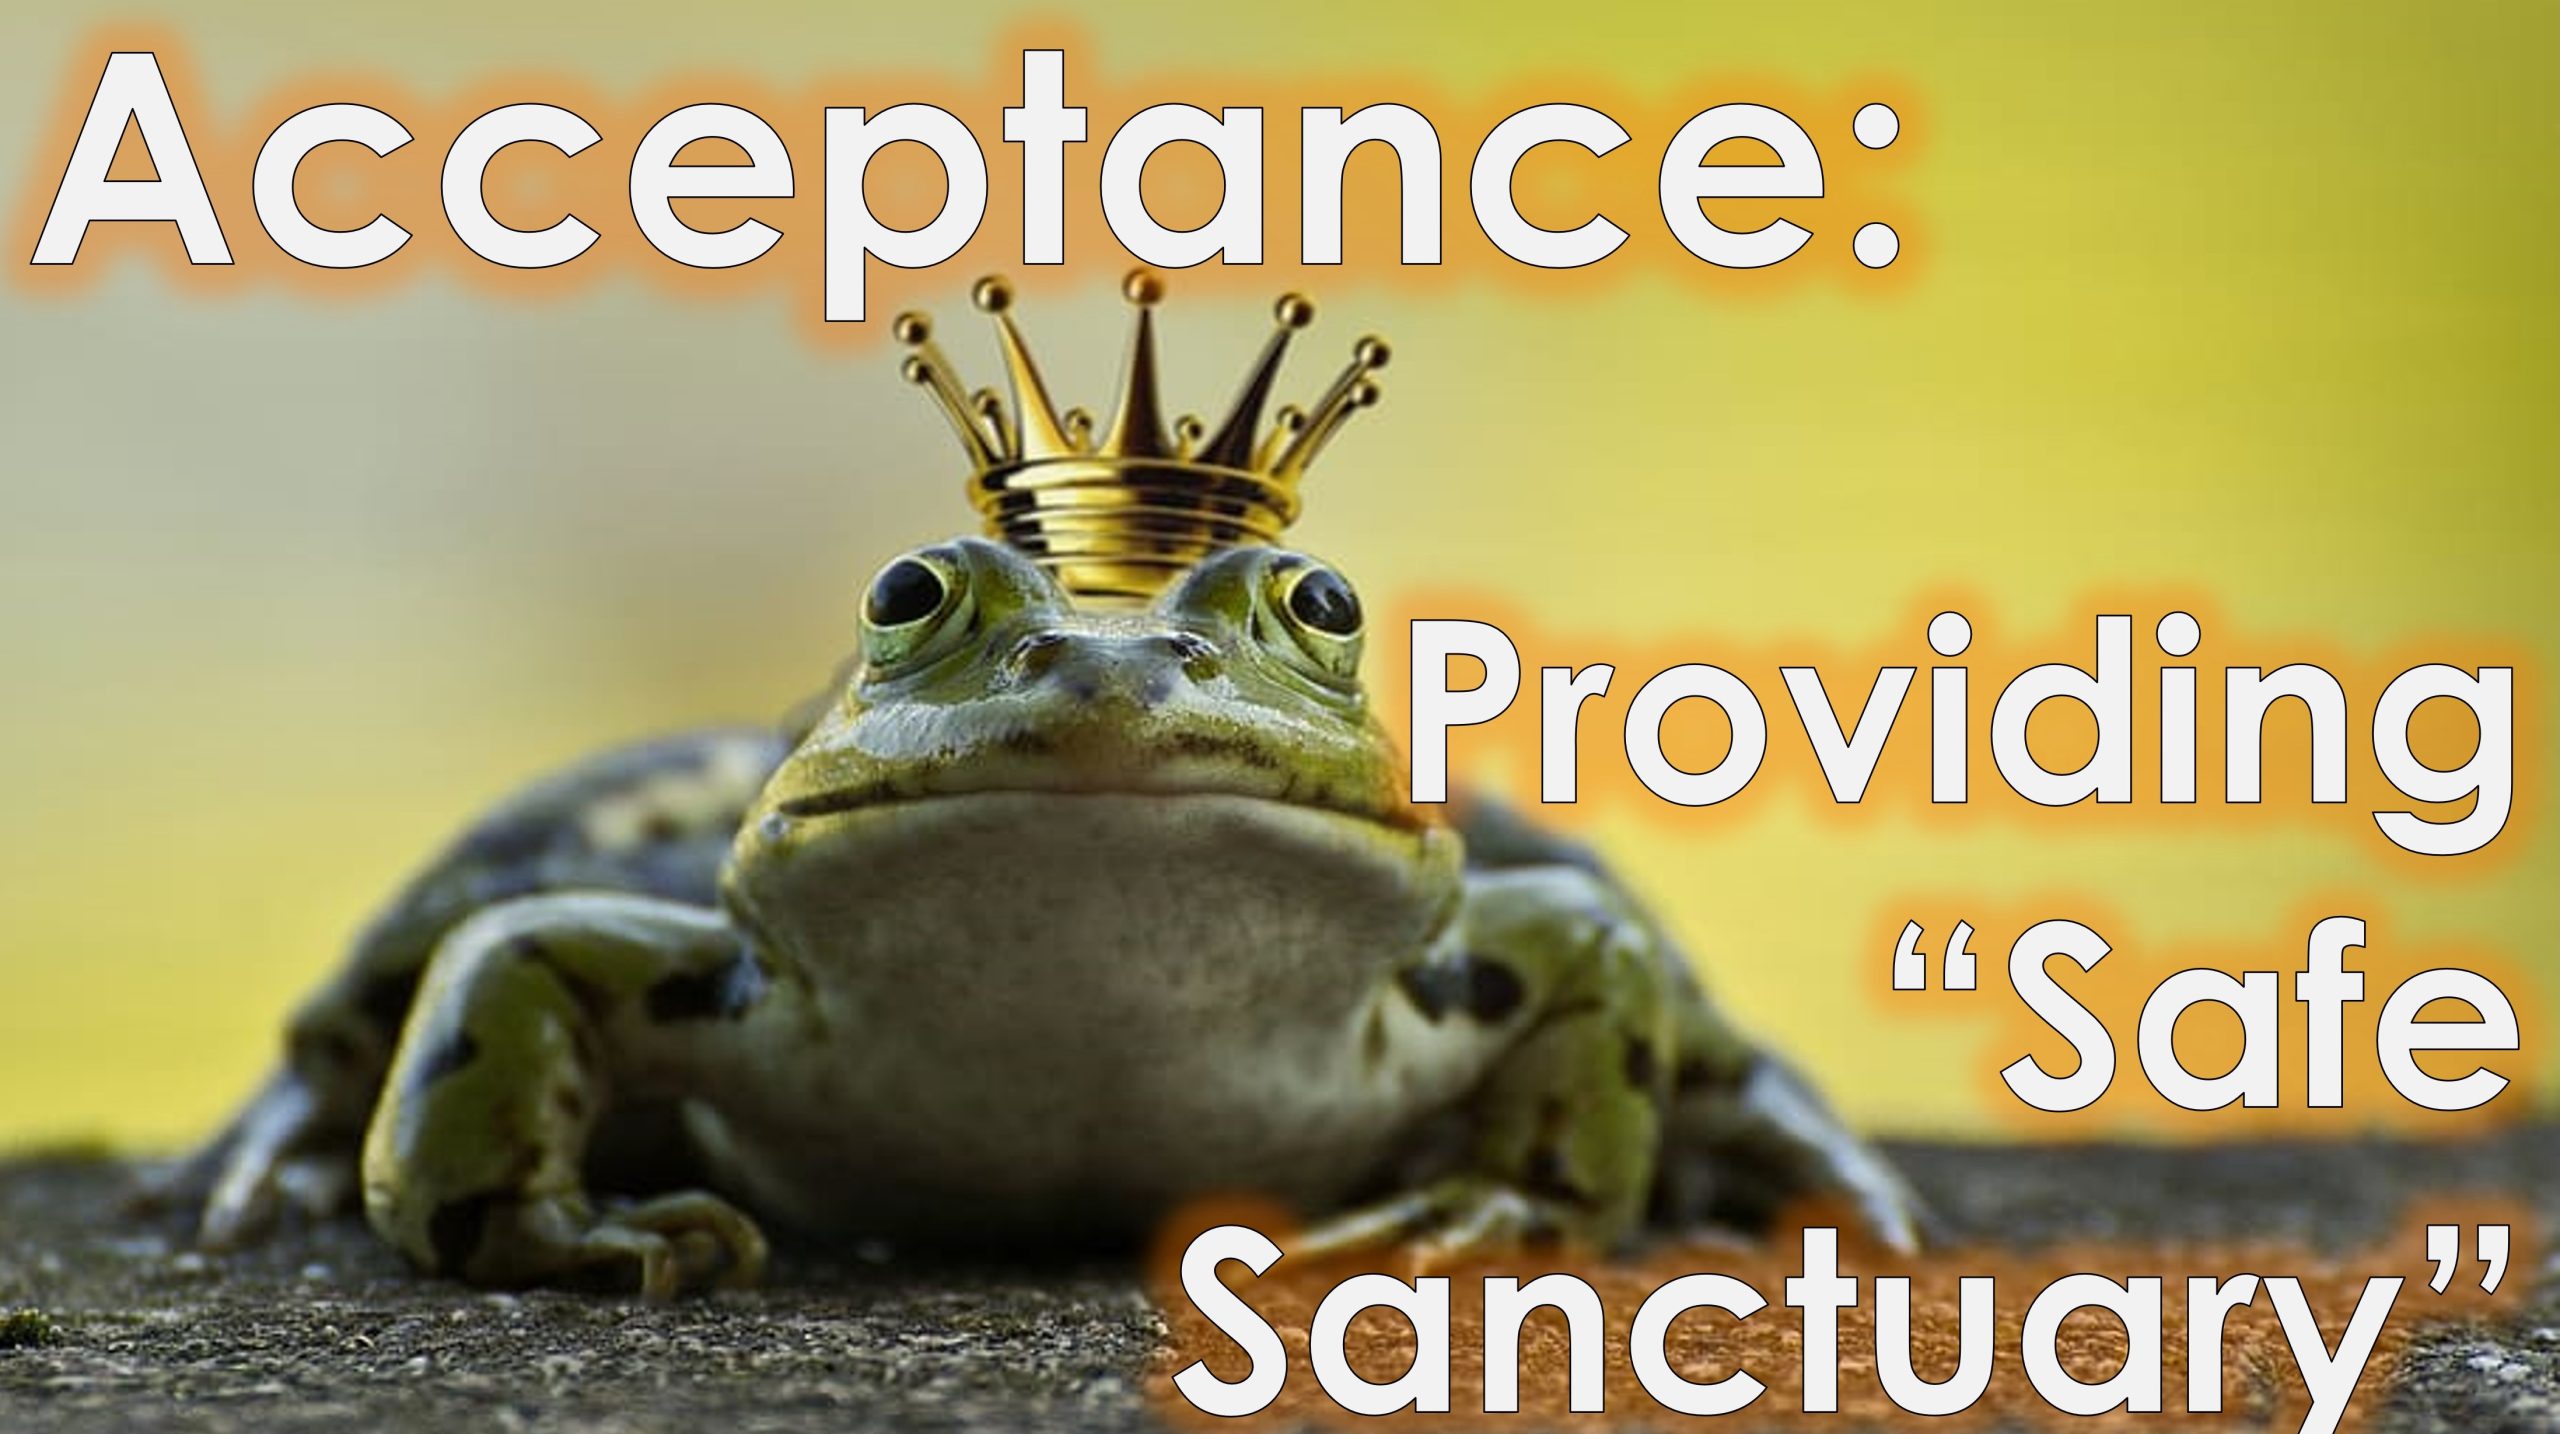 You are currently viewing Acceptance: Providing “Safe Sanctuary” – March 24th